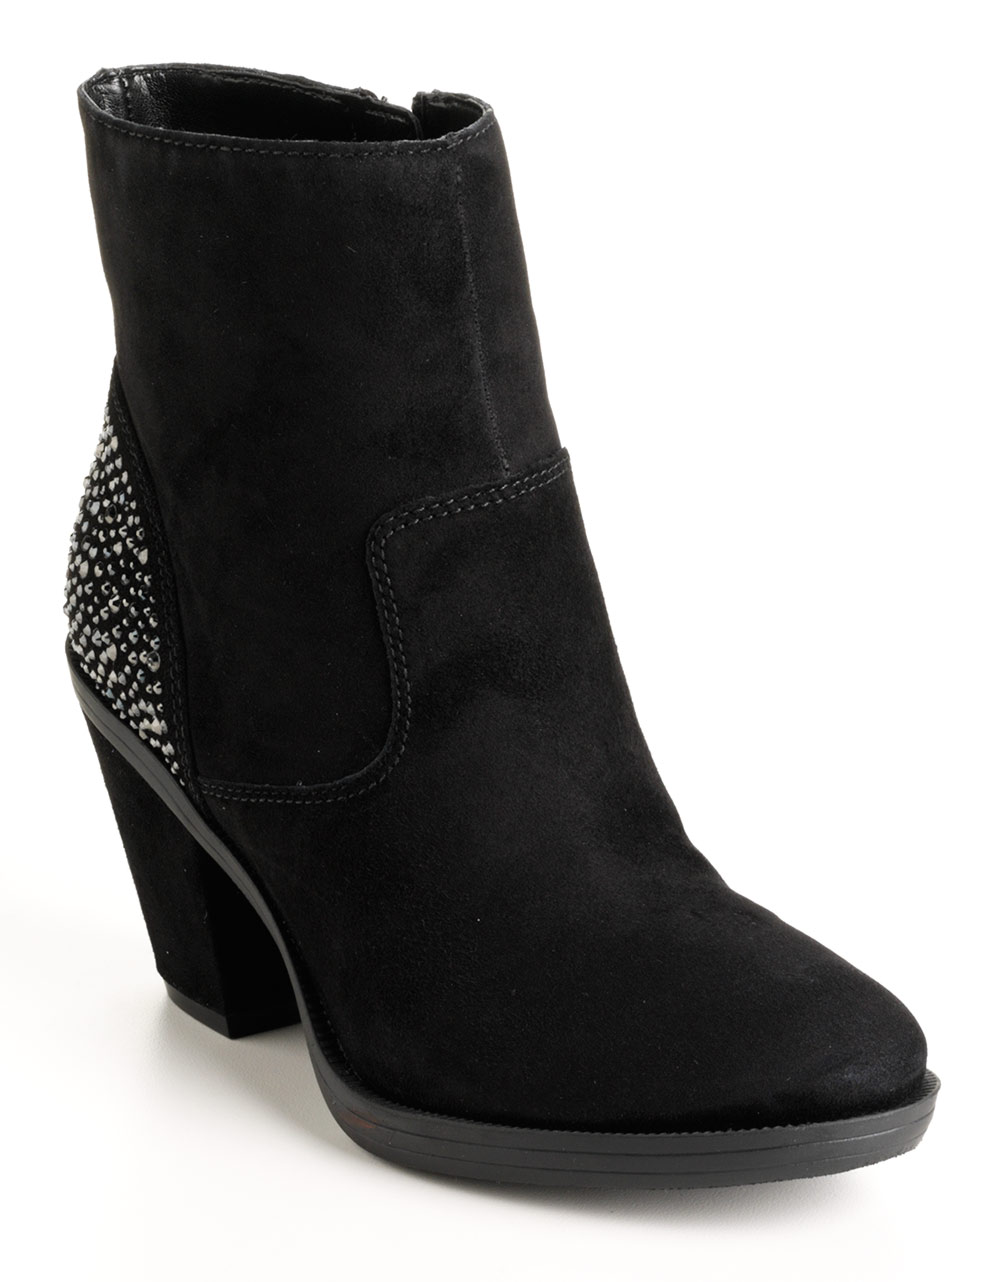 Enzo Angiolini Emzy Suede Ankle Boots in Black (black su) | Lyst